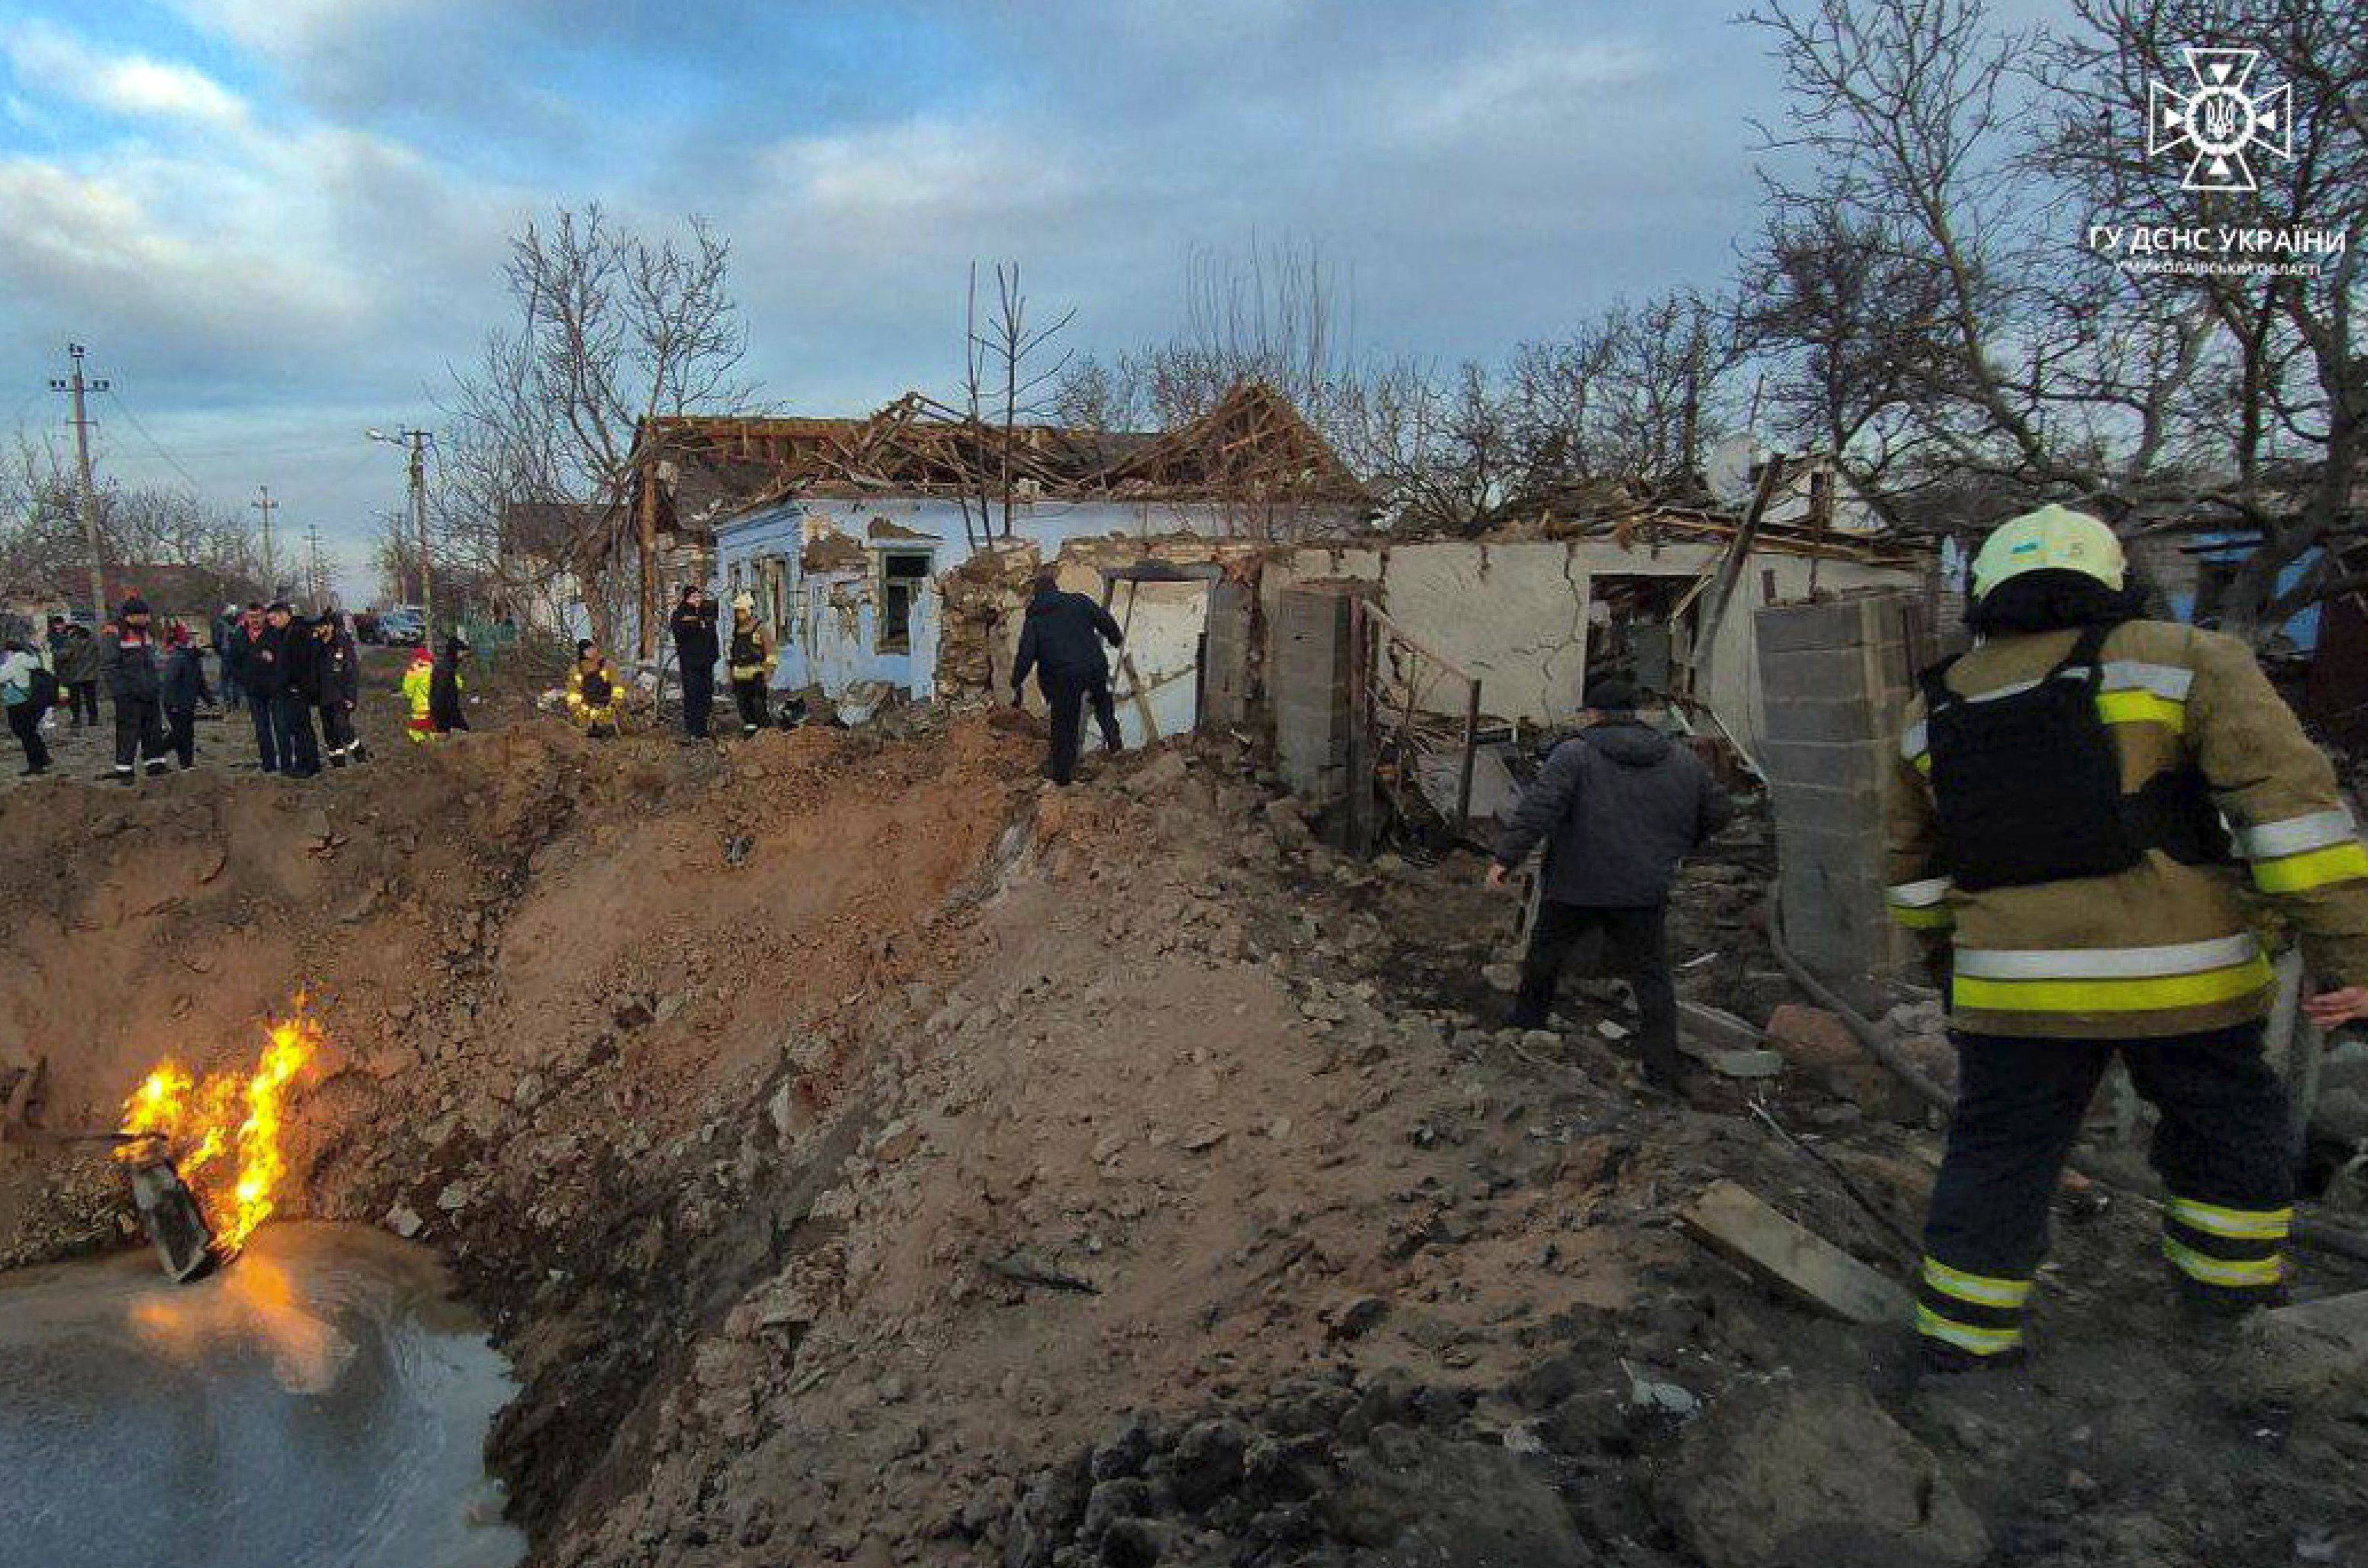 Rscuers work next to a crater following a missile attack in Mykolaiv, amid the Russian invasion of Ukraine. Photo: Handout/Ukrainian Emergency Service/AFP